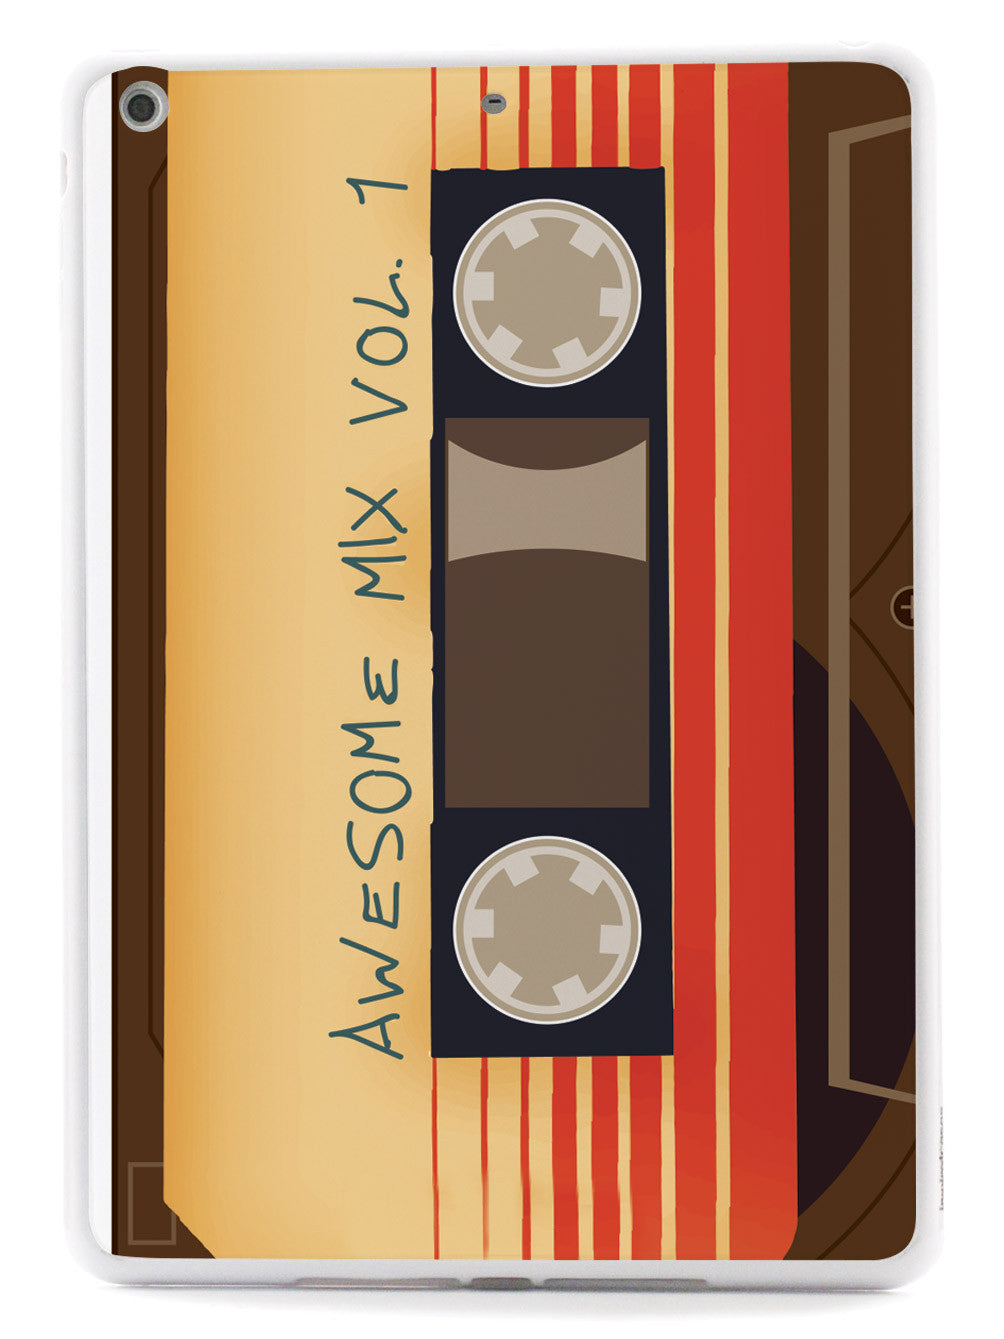 Awesome Mix Vol. 1 Old School Vintage Tape  Case